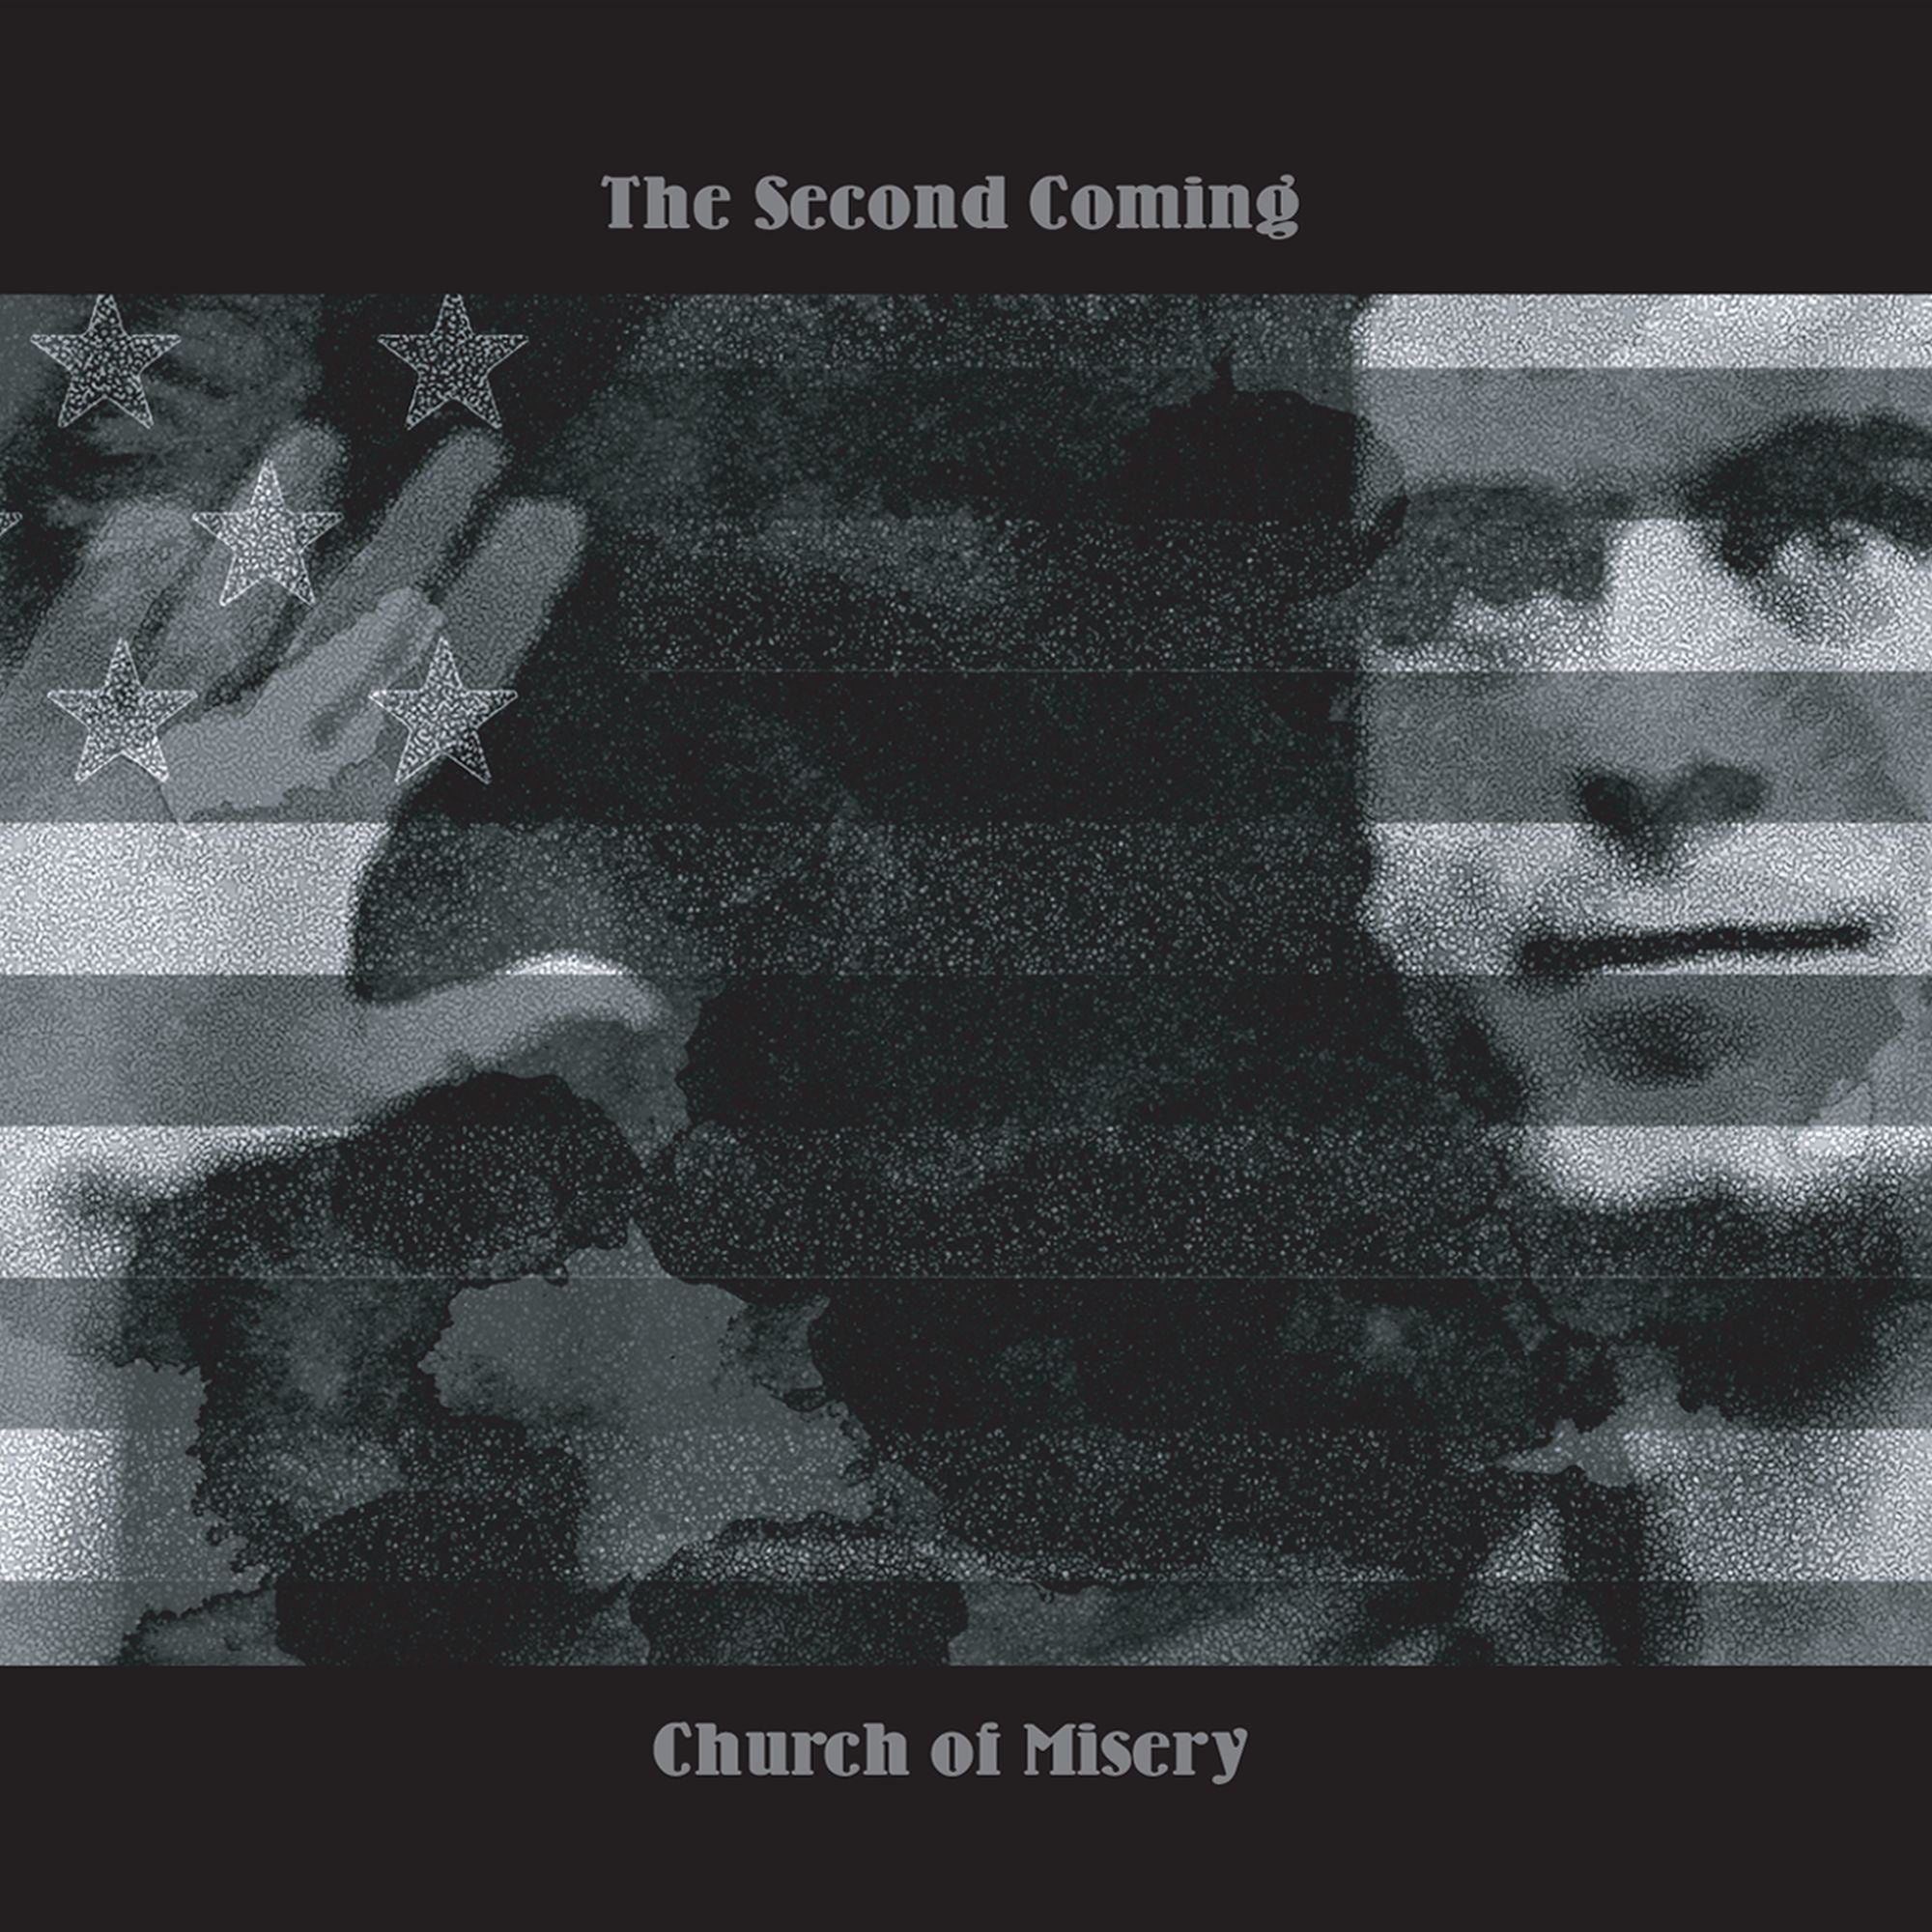 Church Of Misery ‎– The Second Coming (2004) - New 2 Lp Record Rise Above 30th Anniversary Gold Sparkle Vinyl Edition - Doom Metal